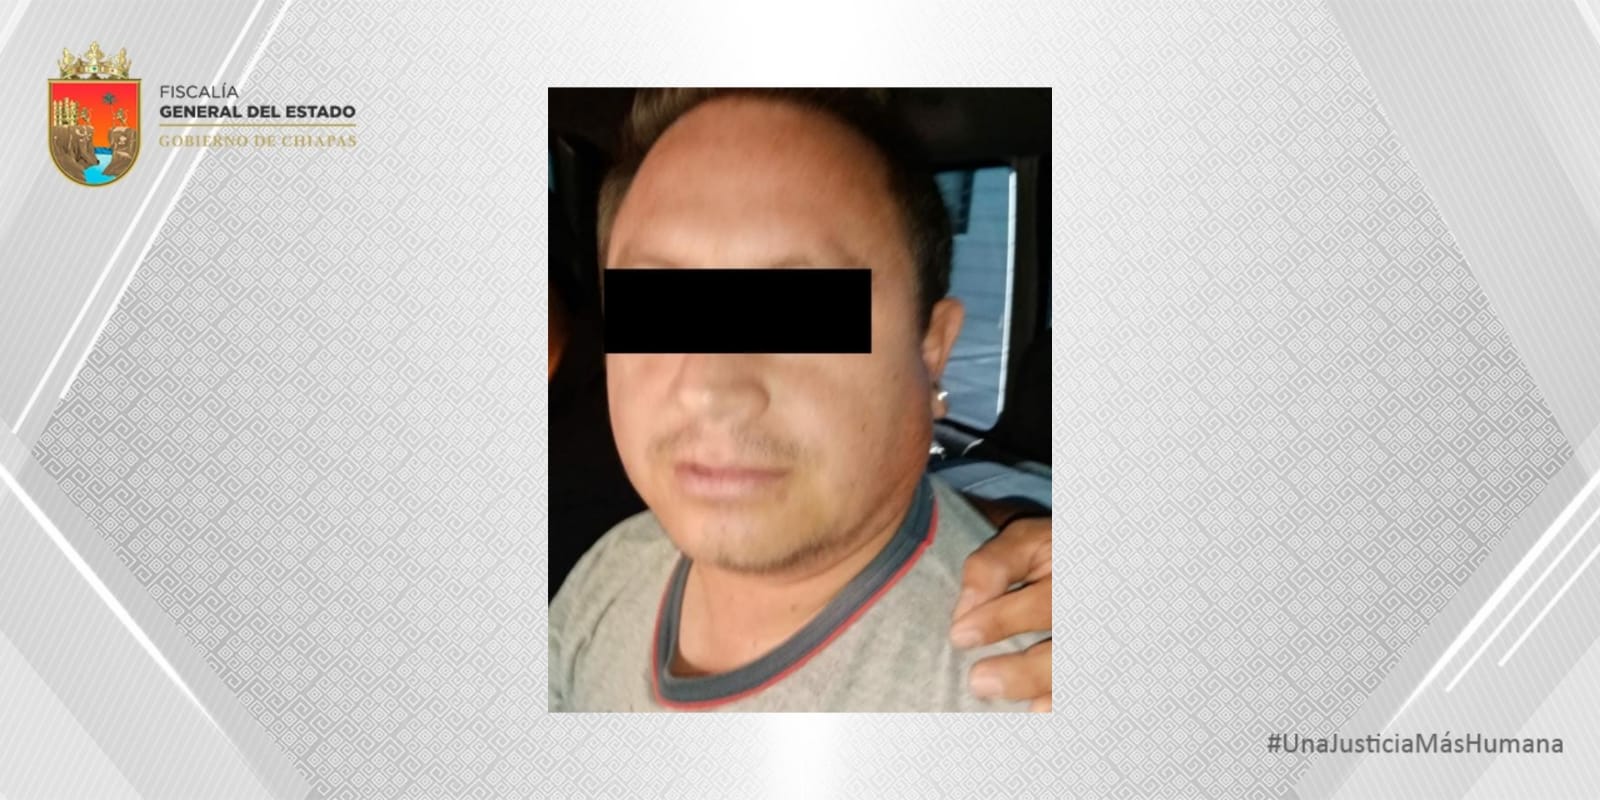 The former activist was sentenced for creating child pornography (Photo: FGE Chiapas)